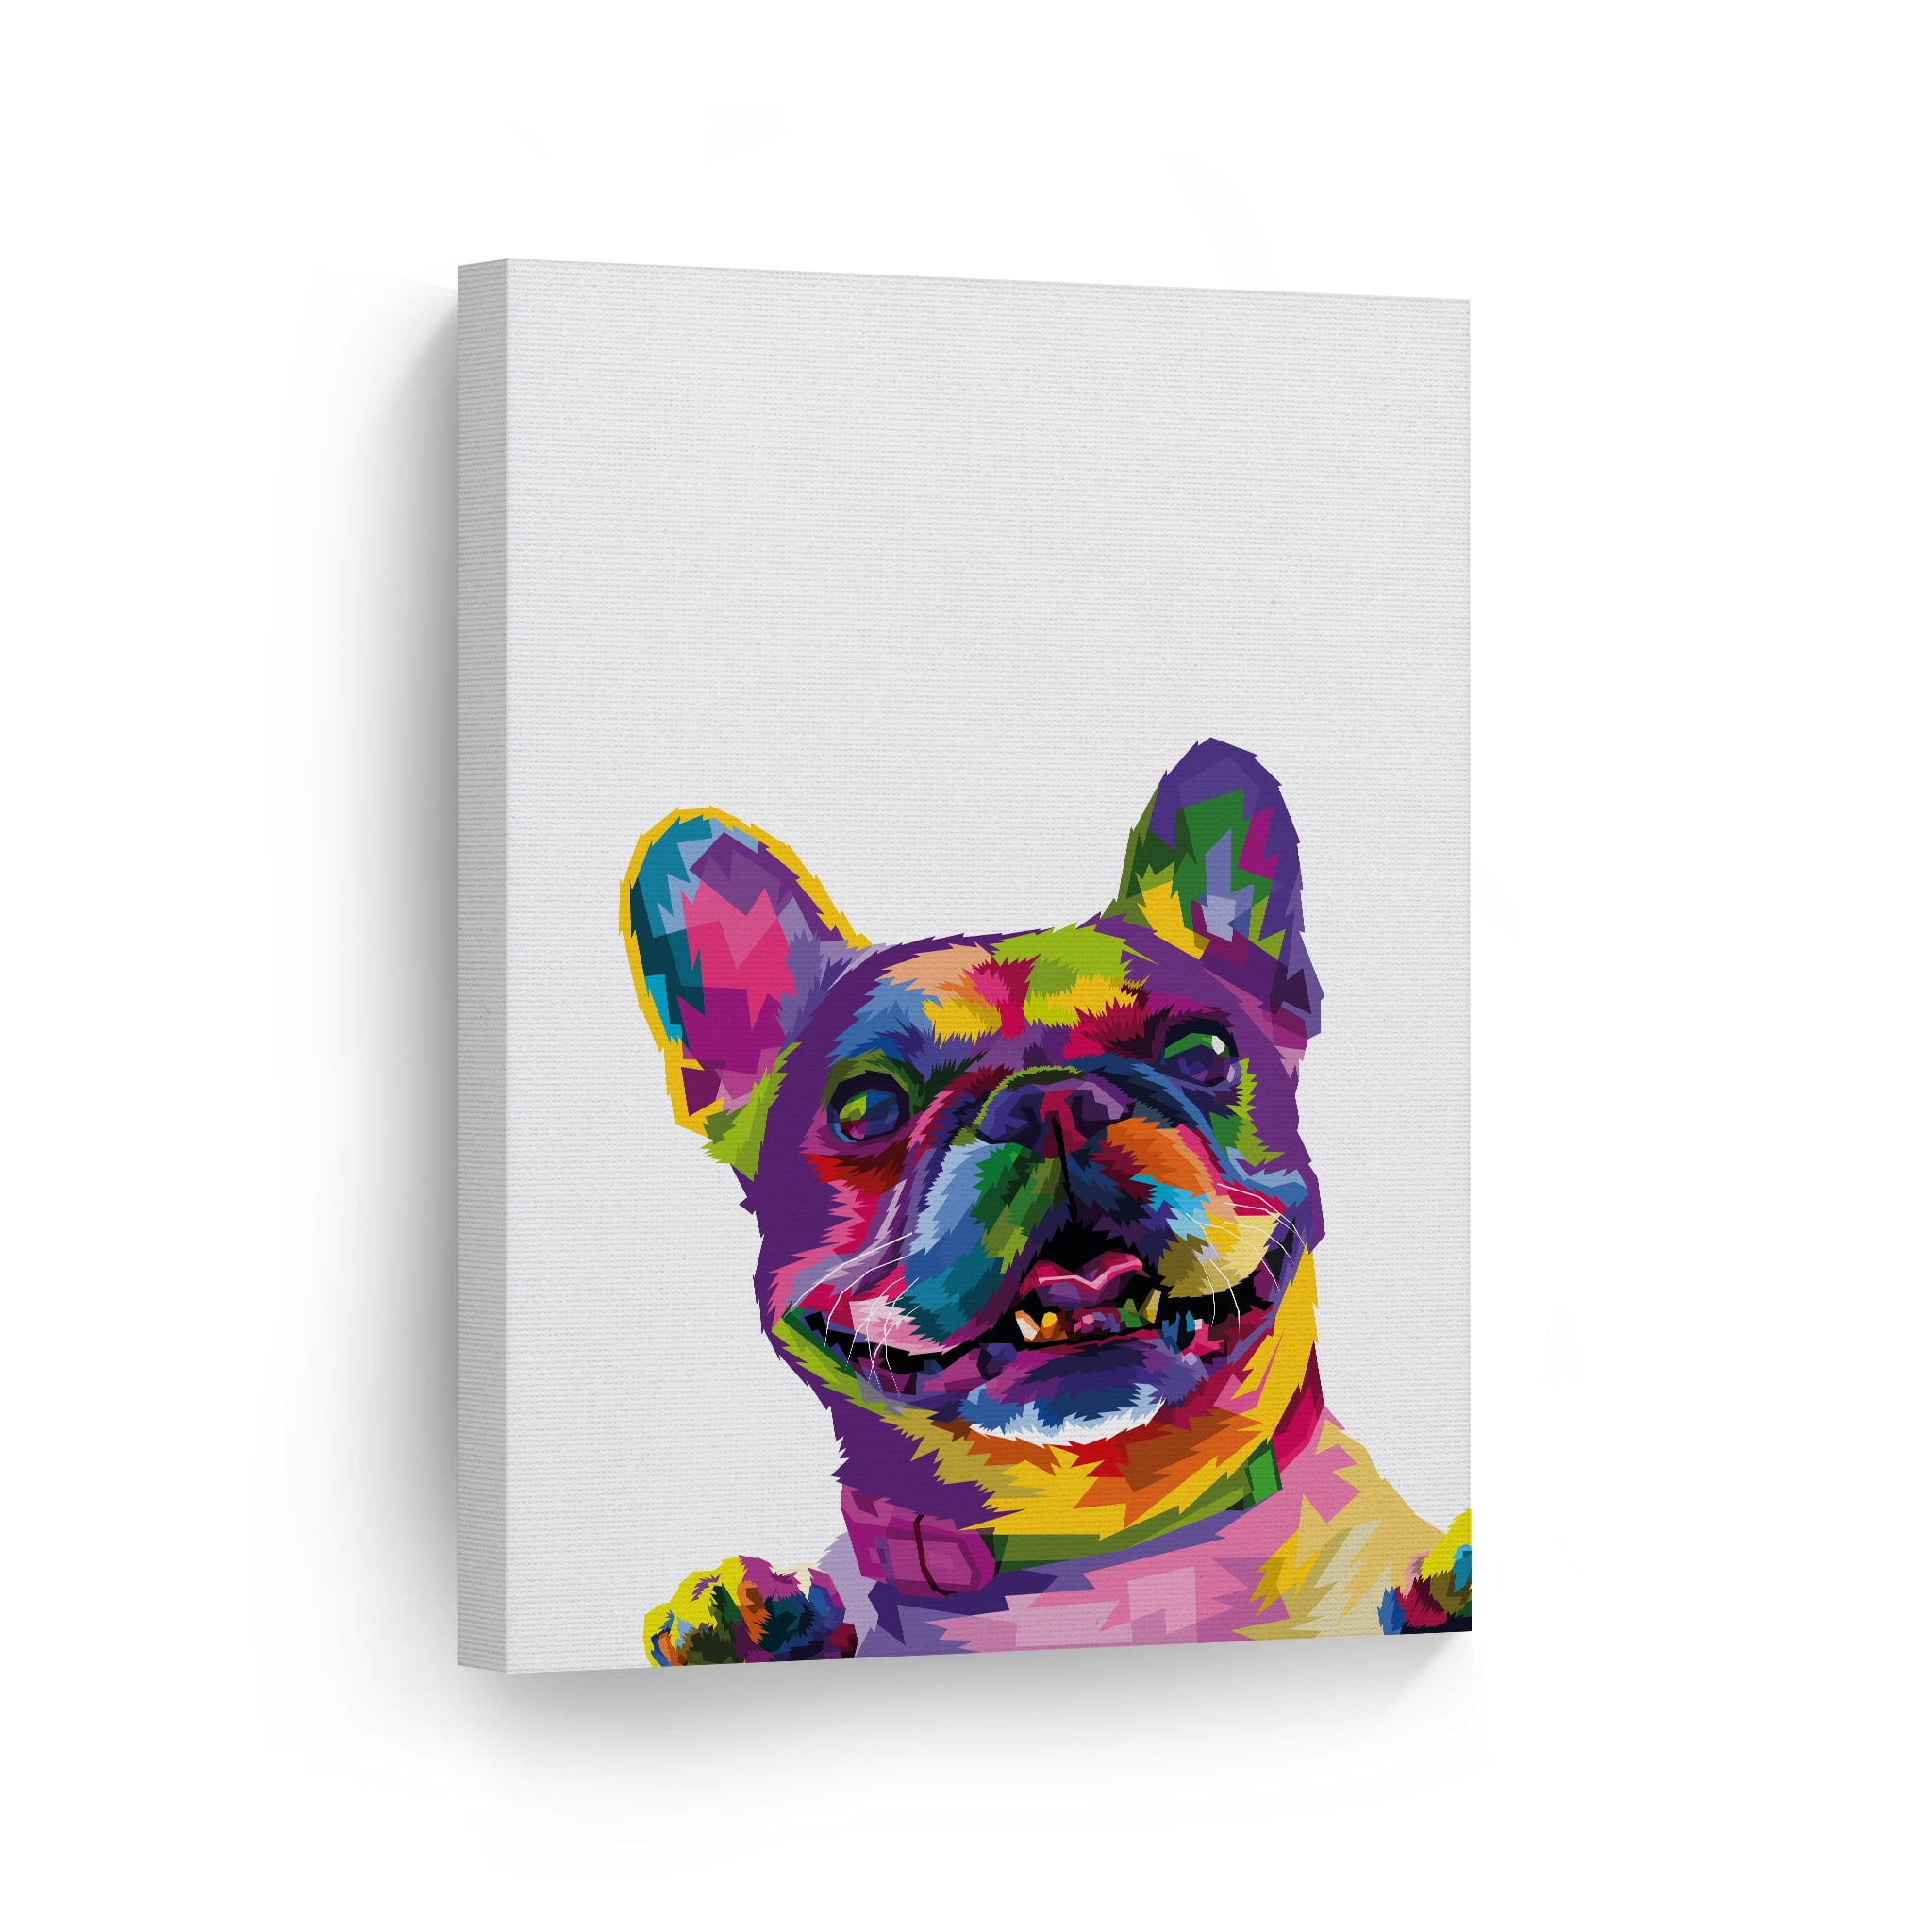 Pet Dog Poster Canvas Painting Animal Wall Art Picture Living Room Home Decor 